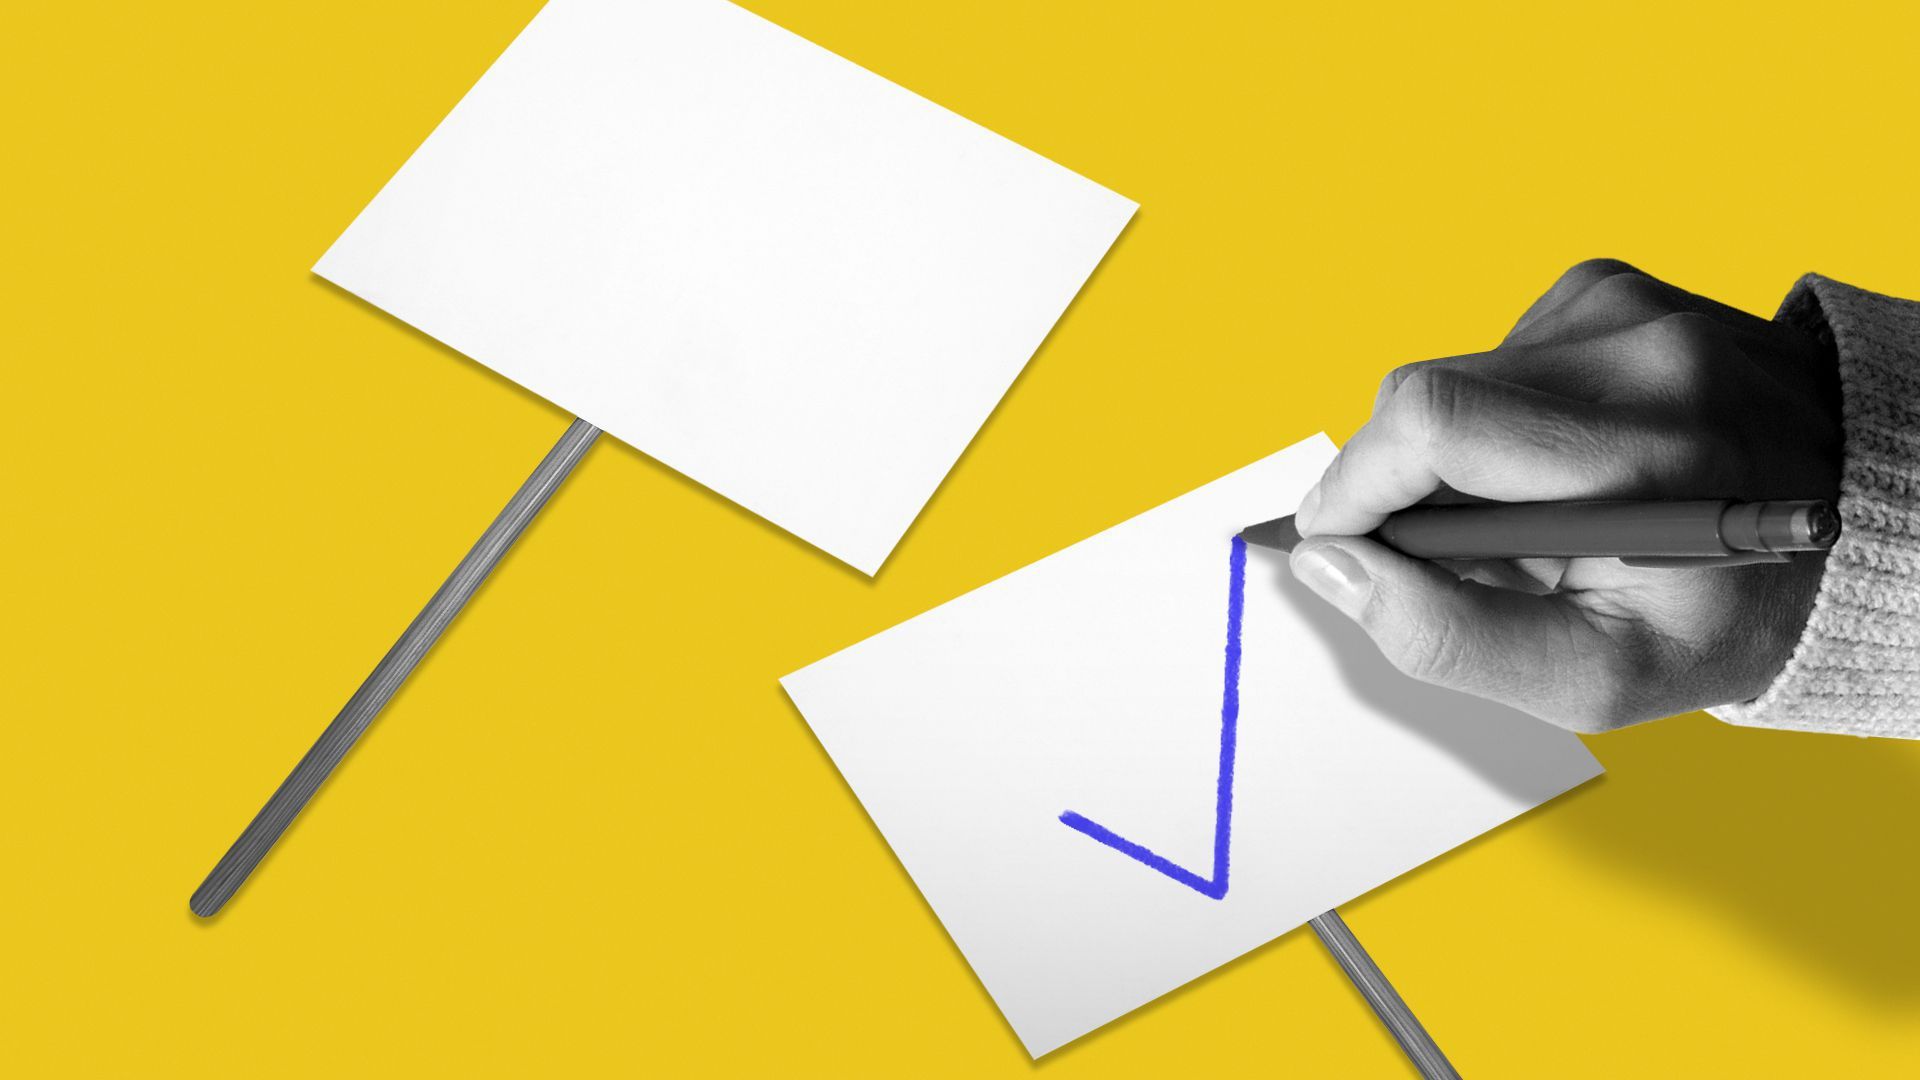 An illustration shows a hand drawing a checkmark on a campaign sign...